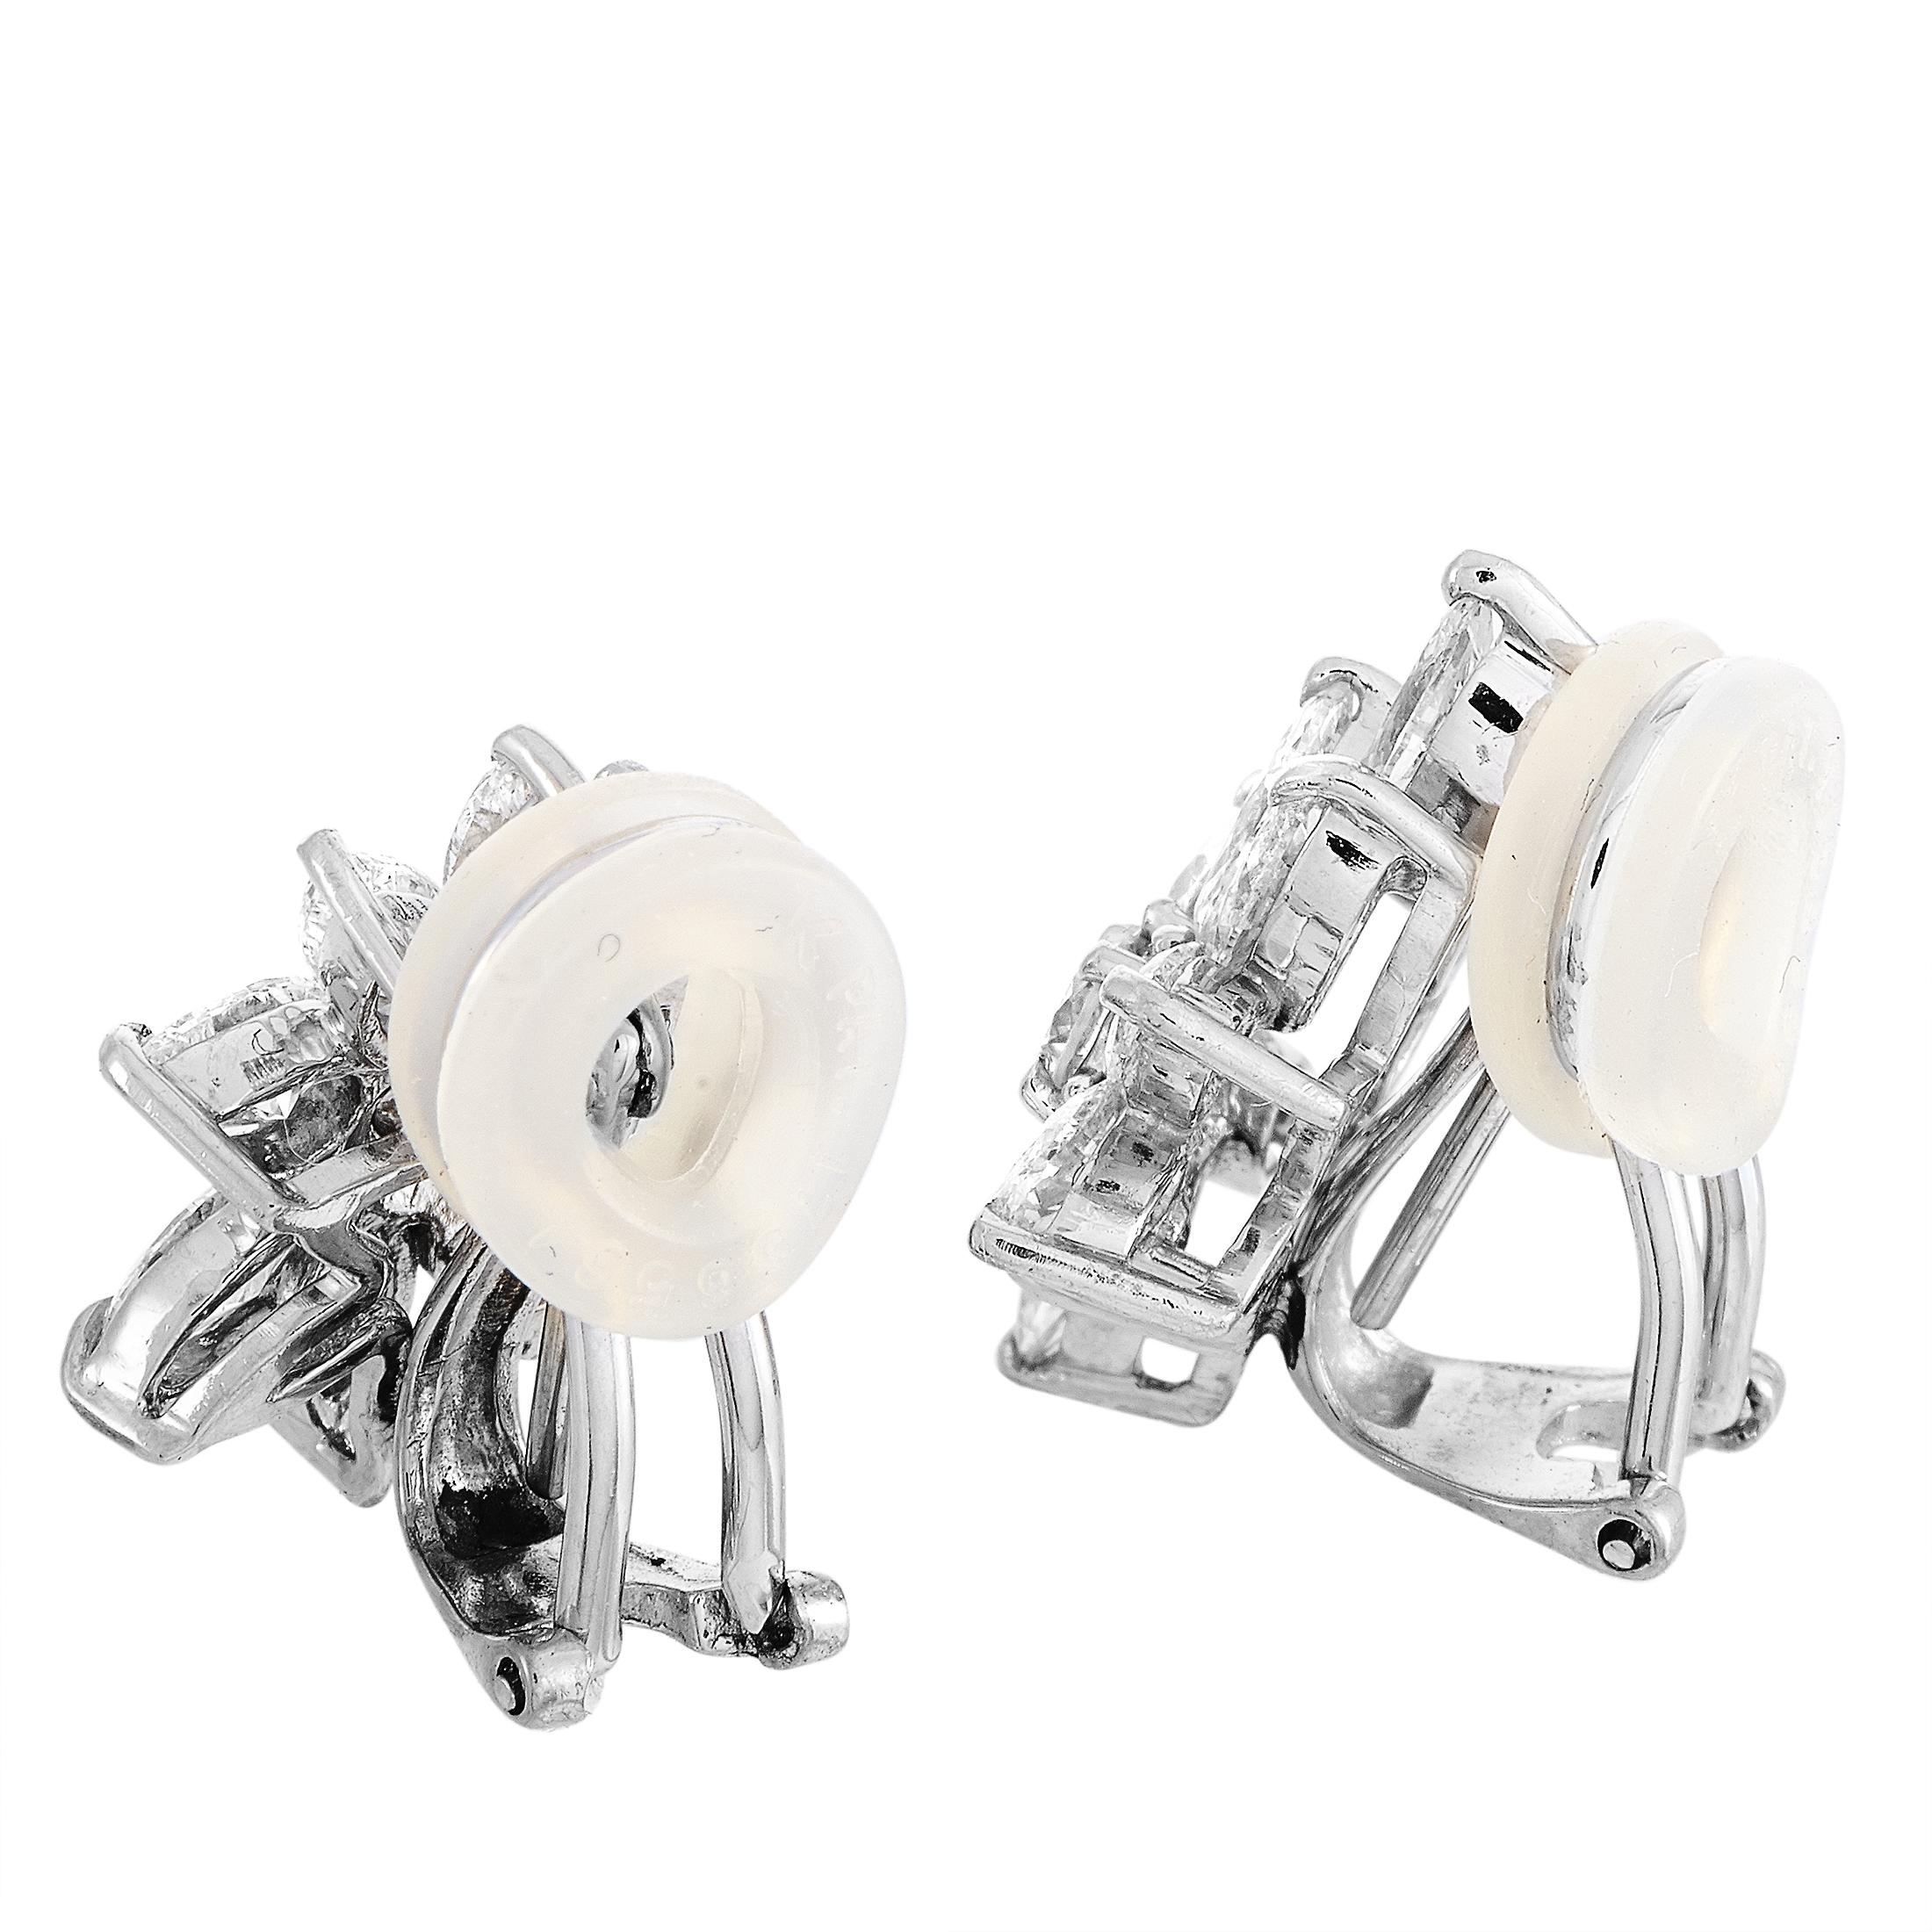 These LB Exclusive earrings are crafted from platinum and each weighs 4.05 grams, measuring 0.75” in length and 0.65” in width. The earrings are set with diamonds that boast G-H color and VS1 clarity and amount to 2.76 carats.

The pair is offered